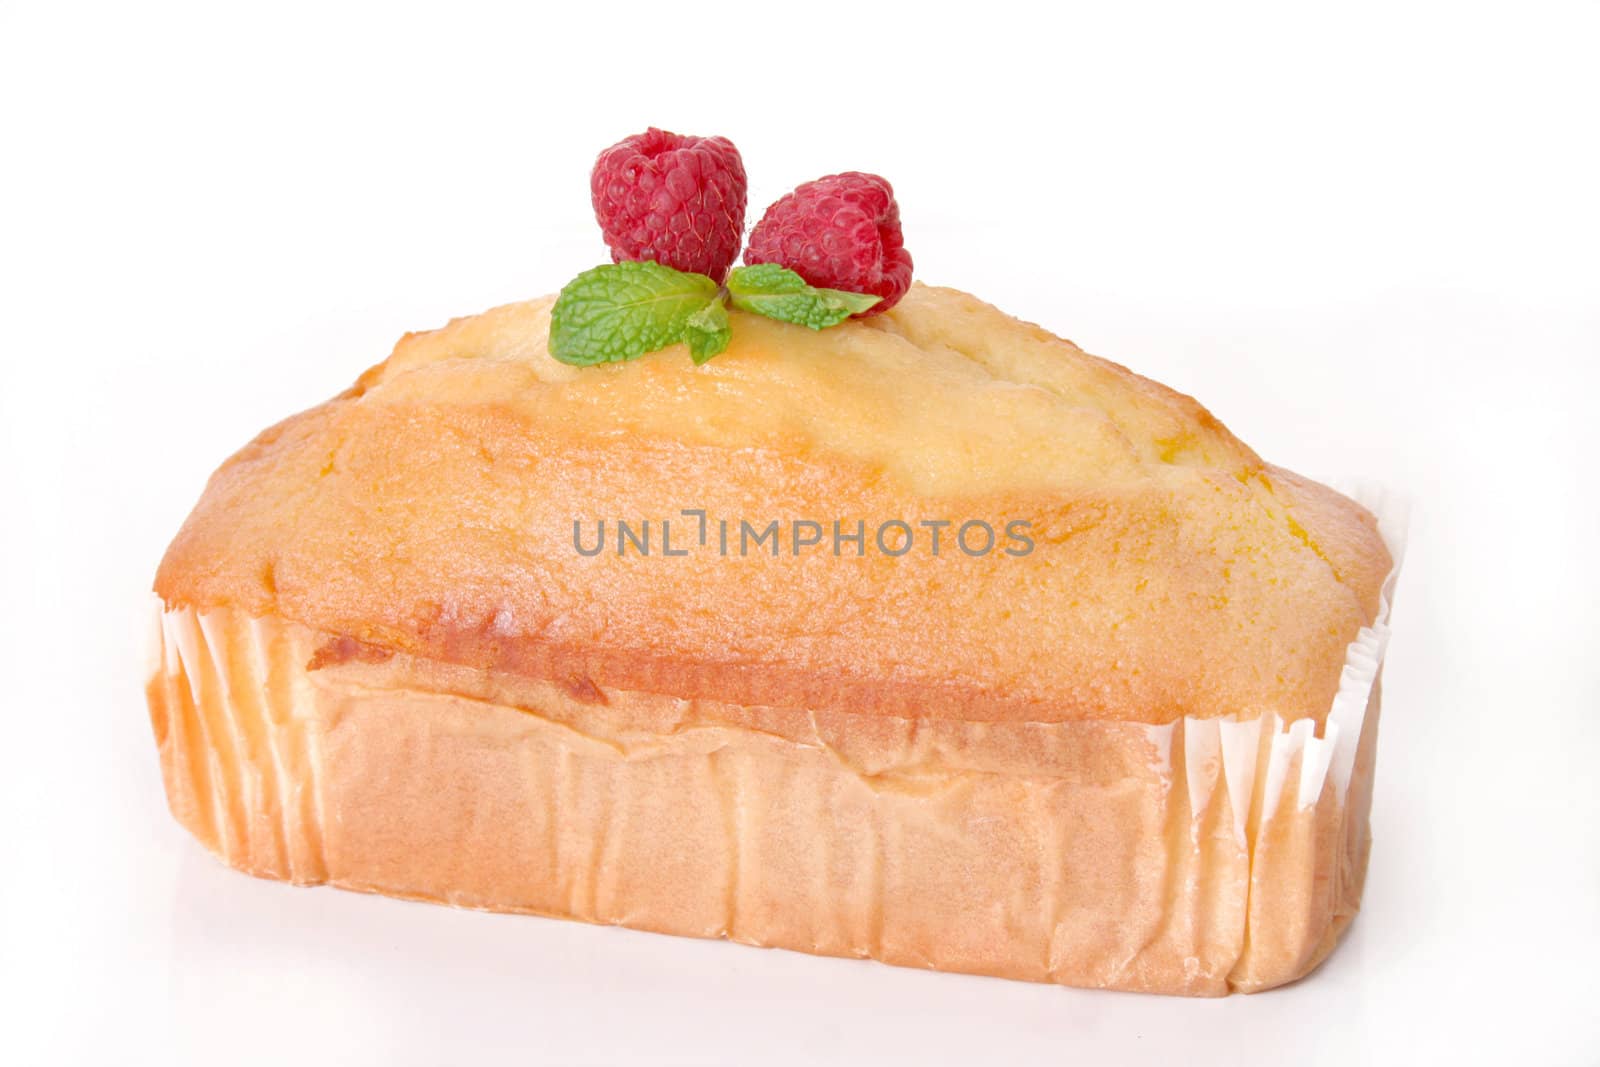 Delicious pound cake with raspberries and mint leaves as a garnish and shot on a white background.